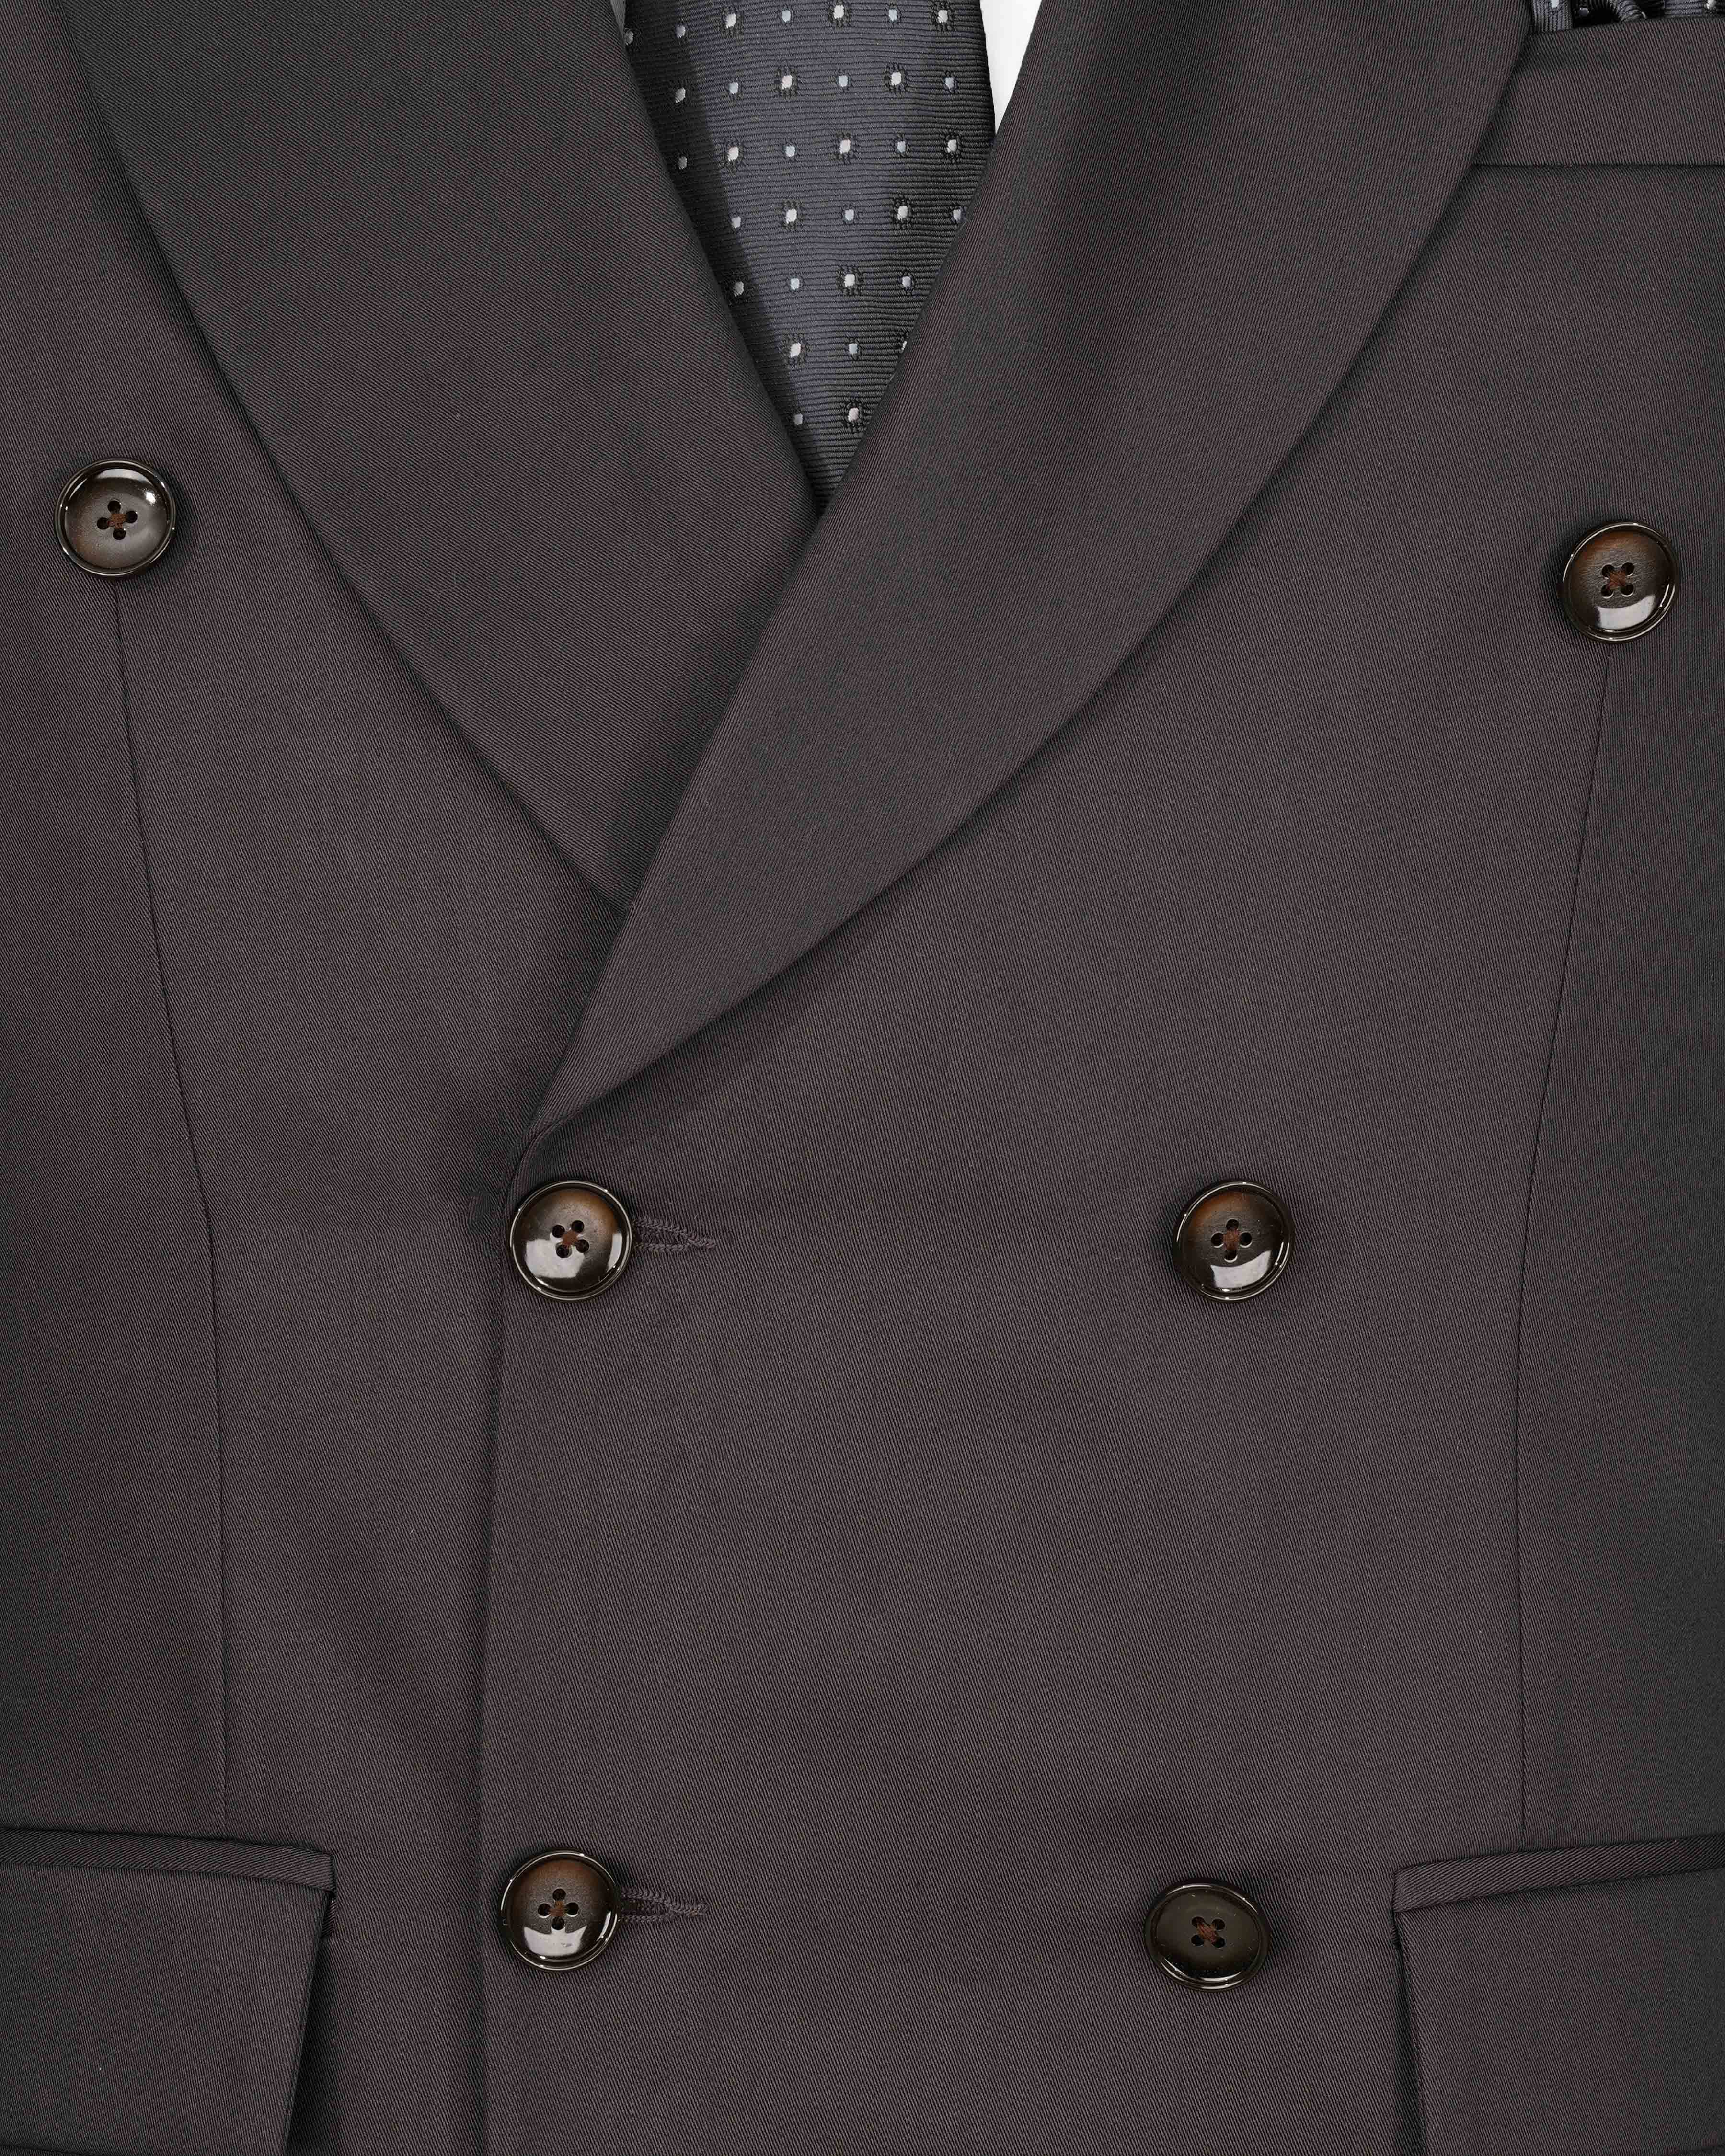 Mine Shaft Brown Double Breasted Blazer BL2077-DB-36, BL2077-DB-38, BL2077-DB-40, BL2077-DB-42, BL2077-DB-44, BL2077-DB-46, BL2077-DB-48, BL2077-DB-50, BL2077-DB-52, BL2077-DB-54, BL2077-DB-56, BL2077-DB-58, BL2077-DB-60